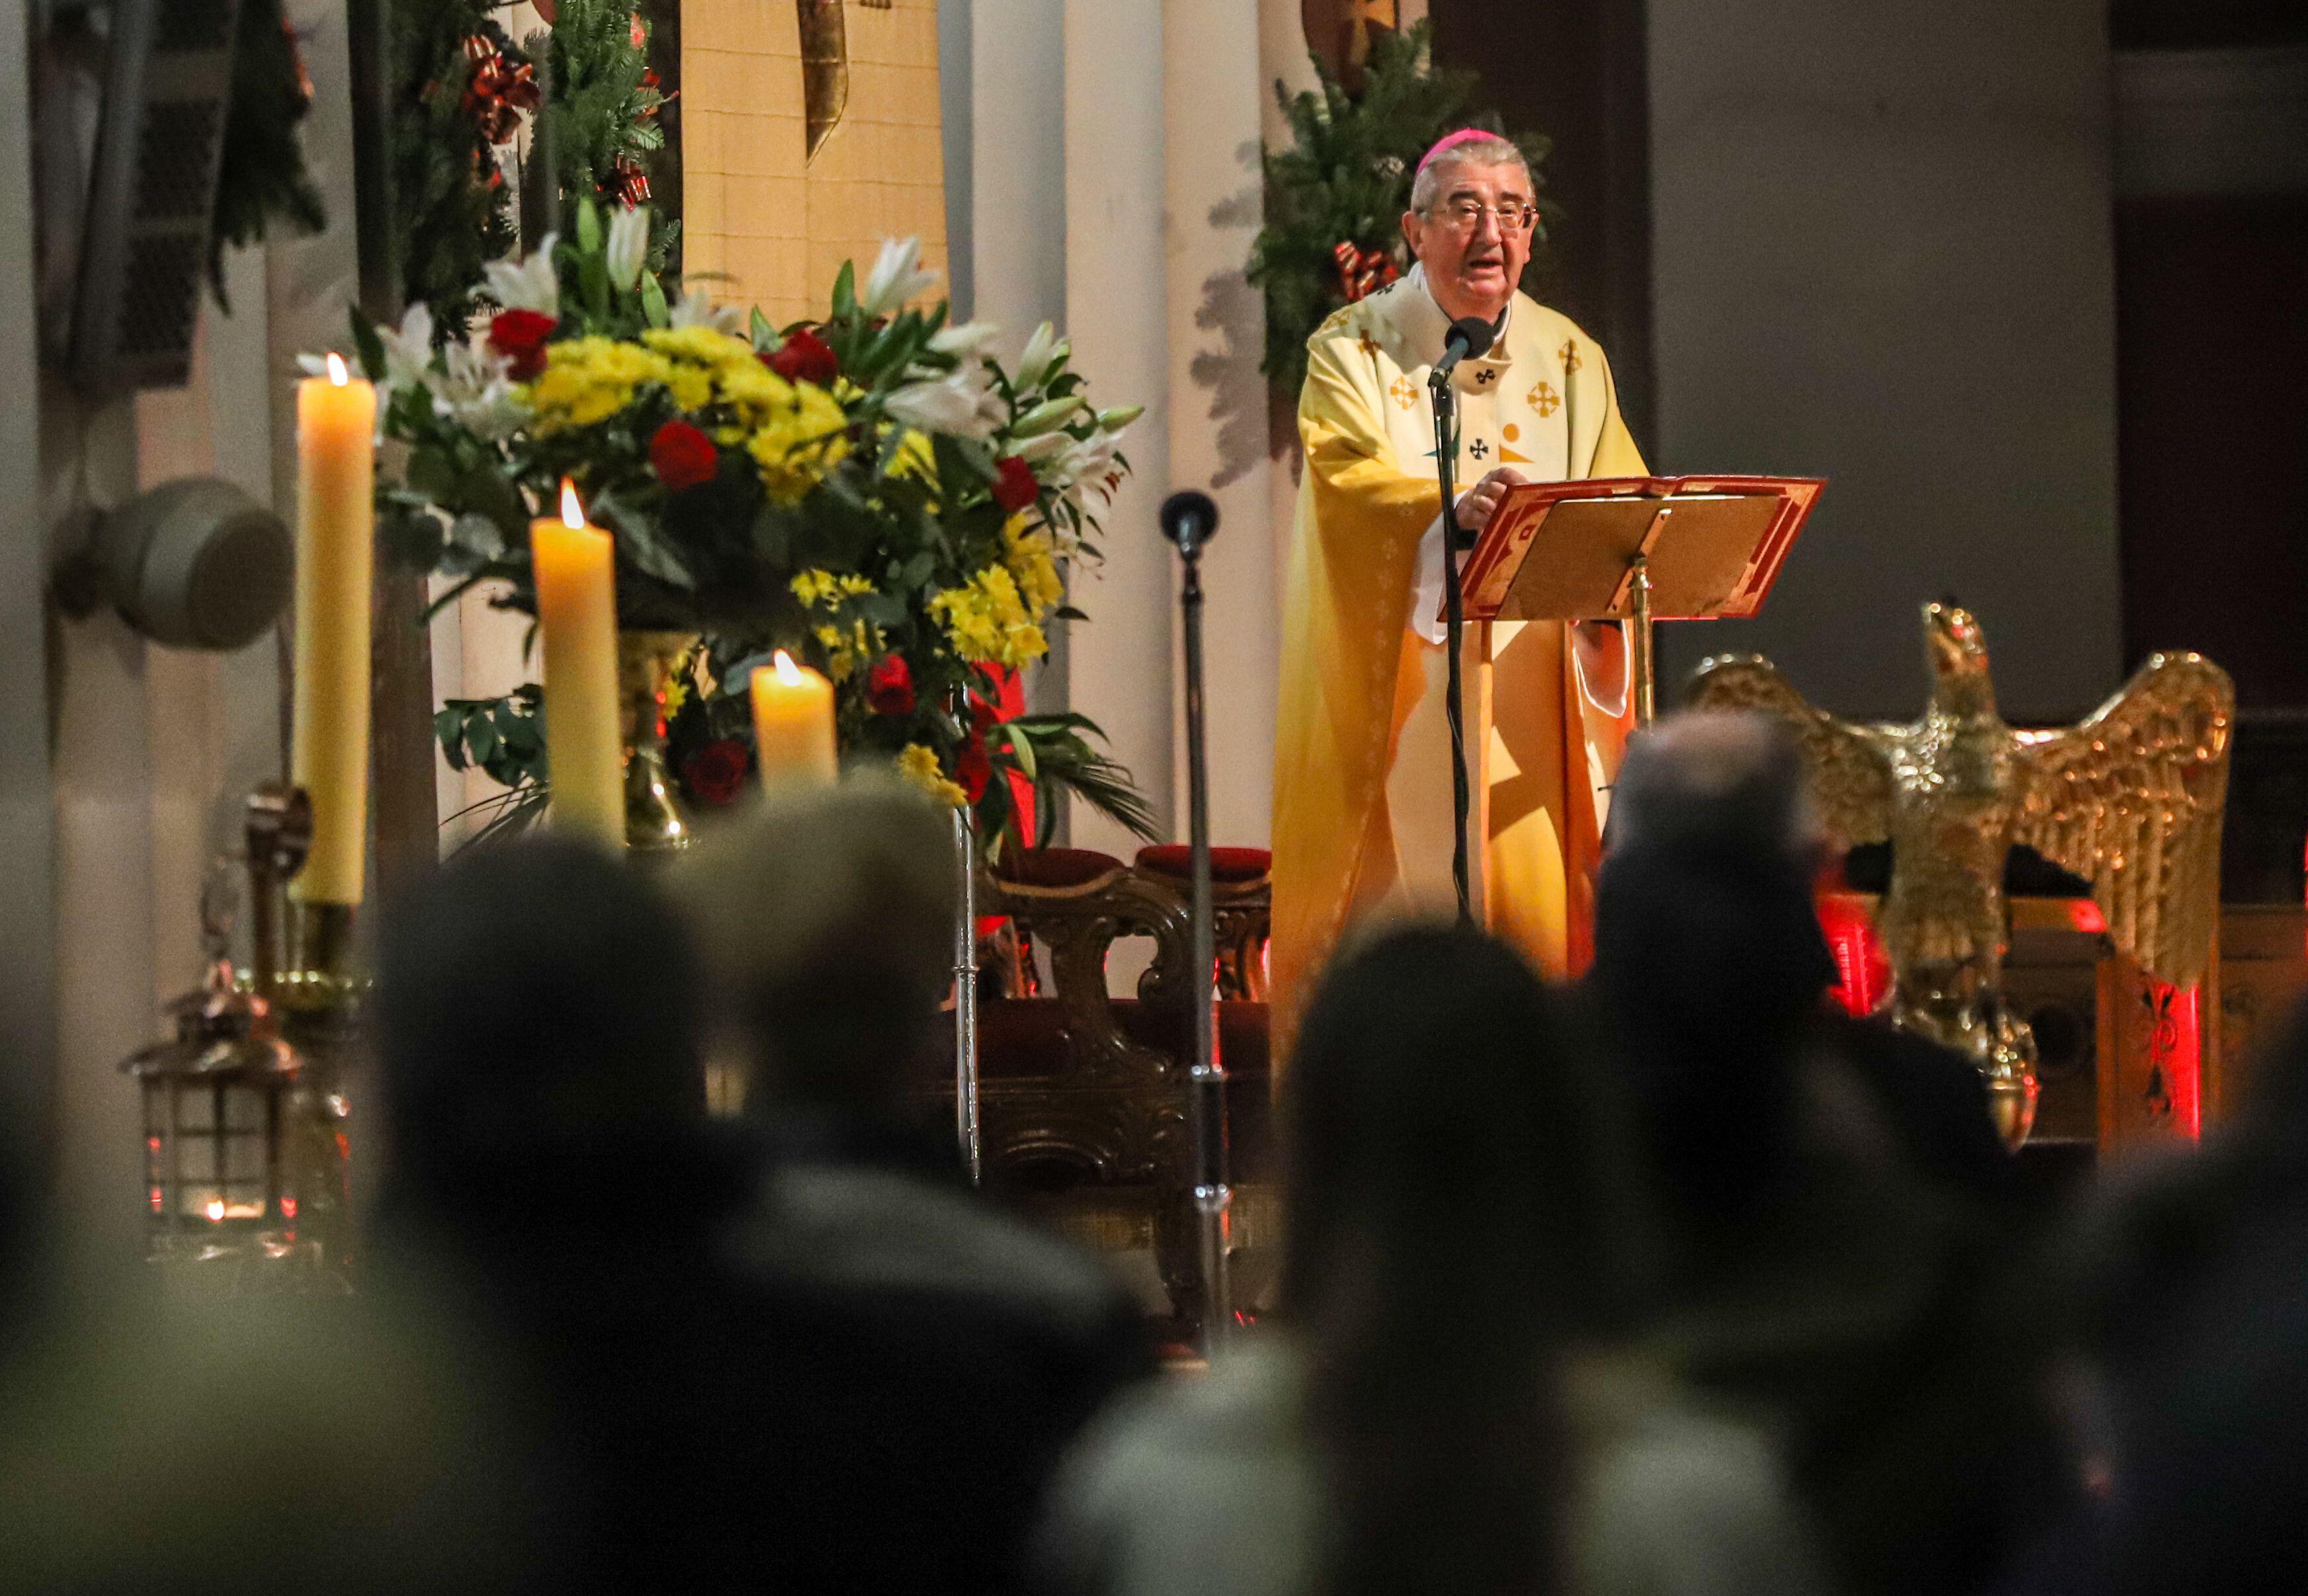 Church must rediscover place in Irish culture says archbishop